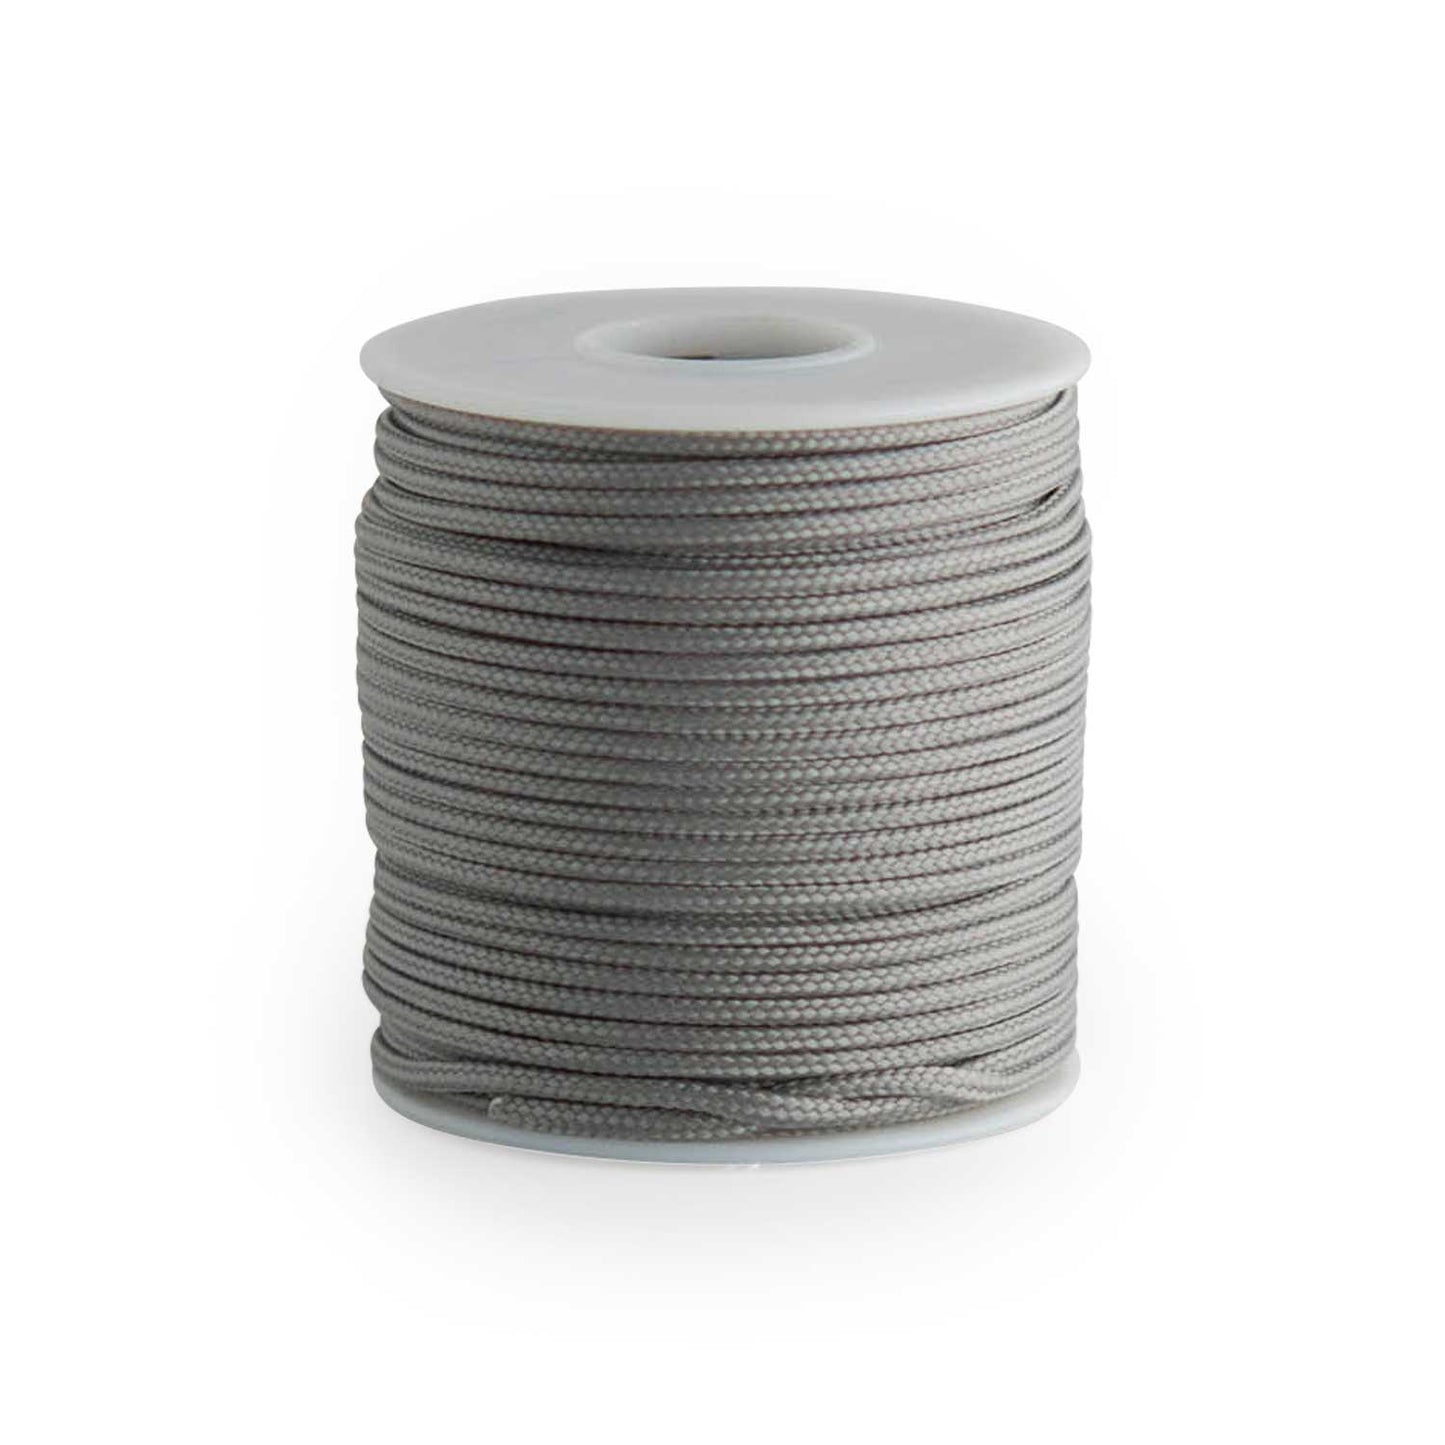 LAST CHANCE Nylon Paracord - Non-Fusing Grey from Cara & Co Craft Supply